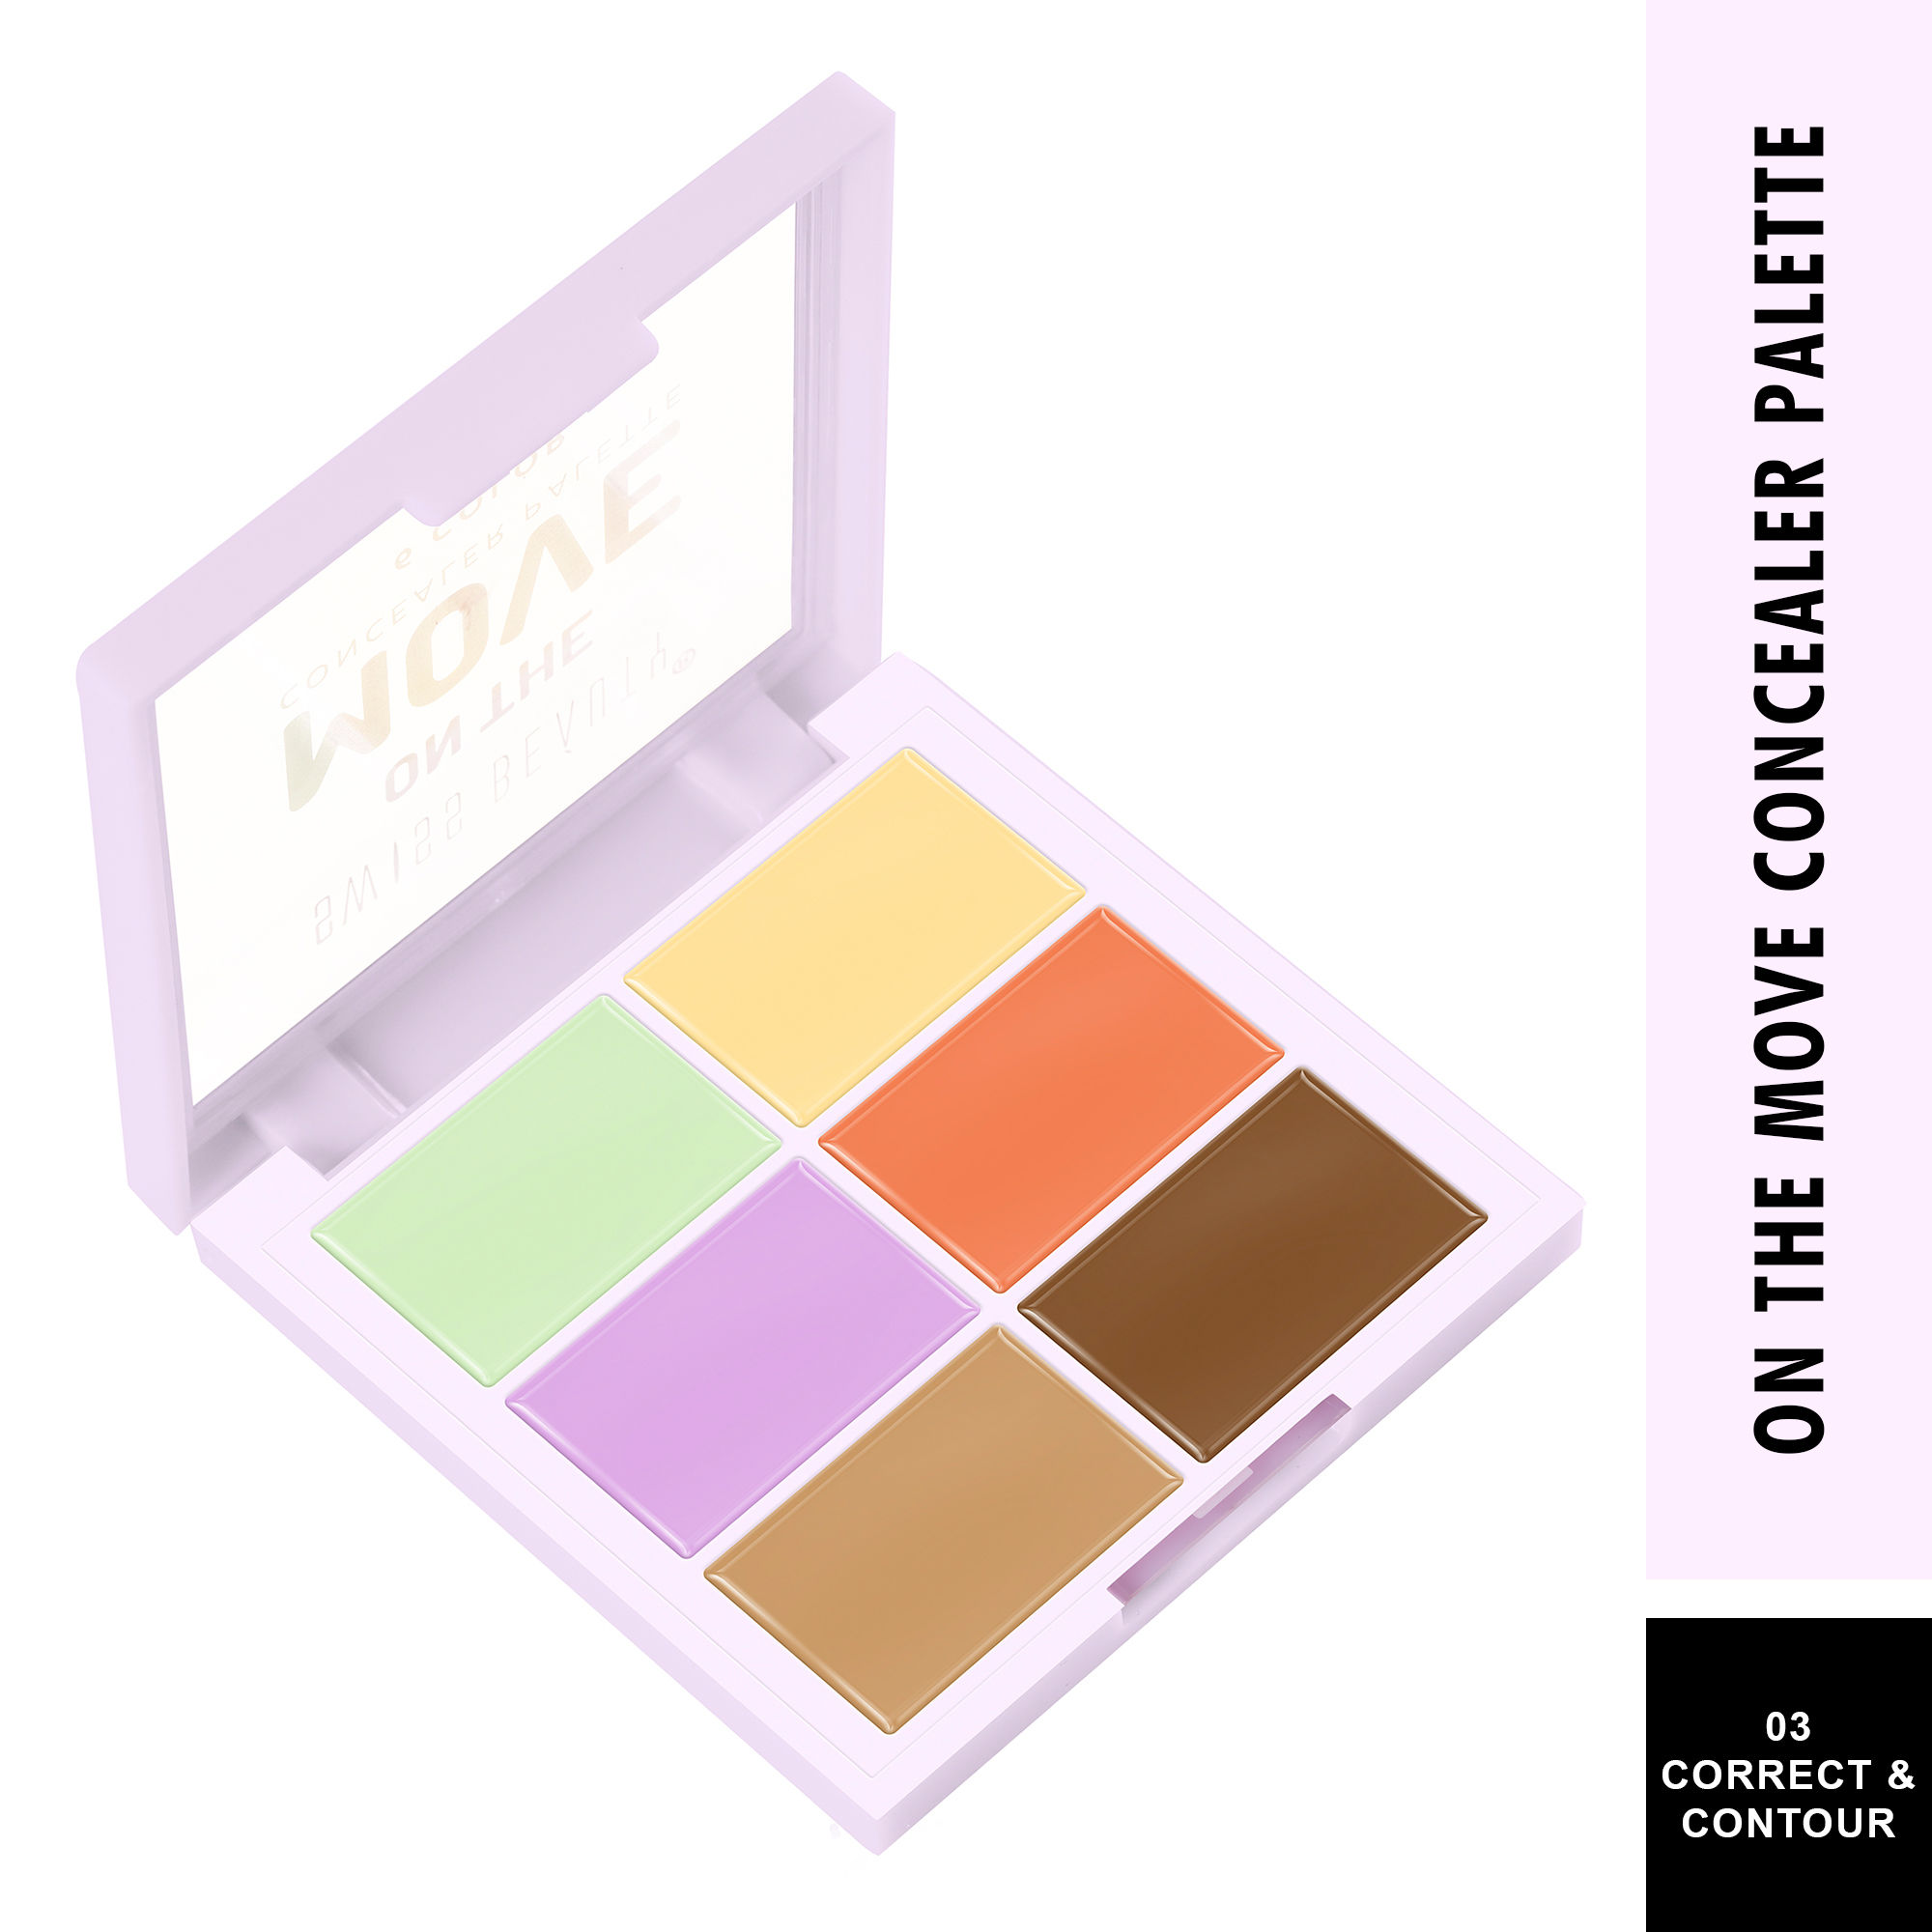 Buy Swiss Beauty On The Move Concealer Palette Online